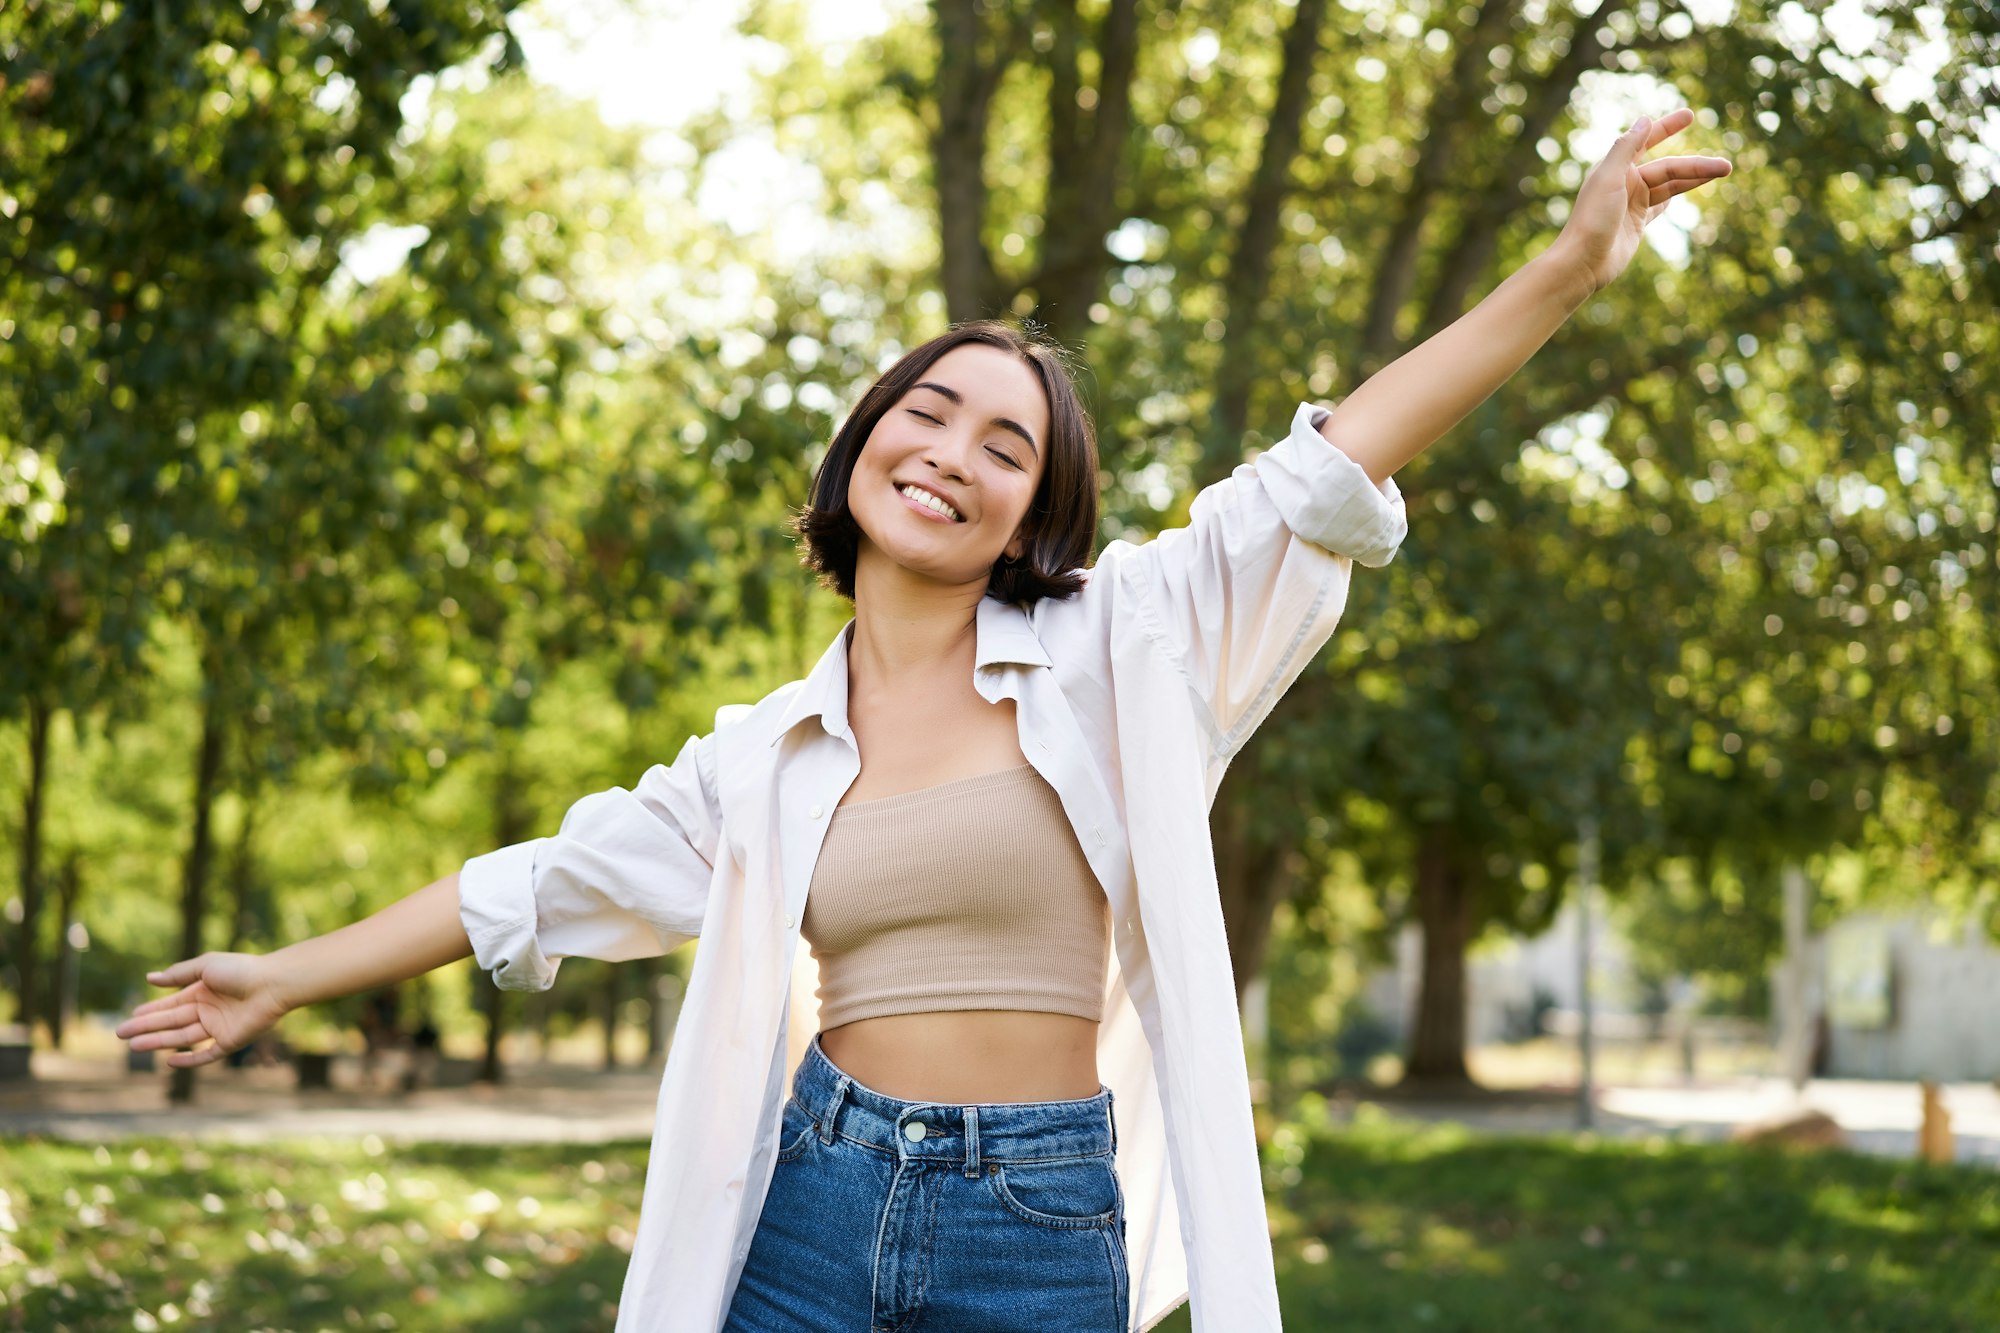 Carefree woman dancing and walking in park with hands lifted up high, smiling happily. Lifestyle